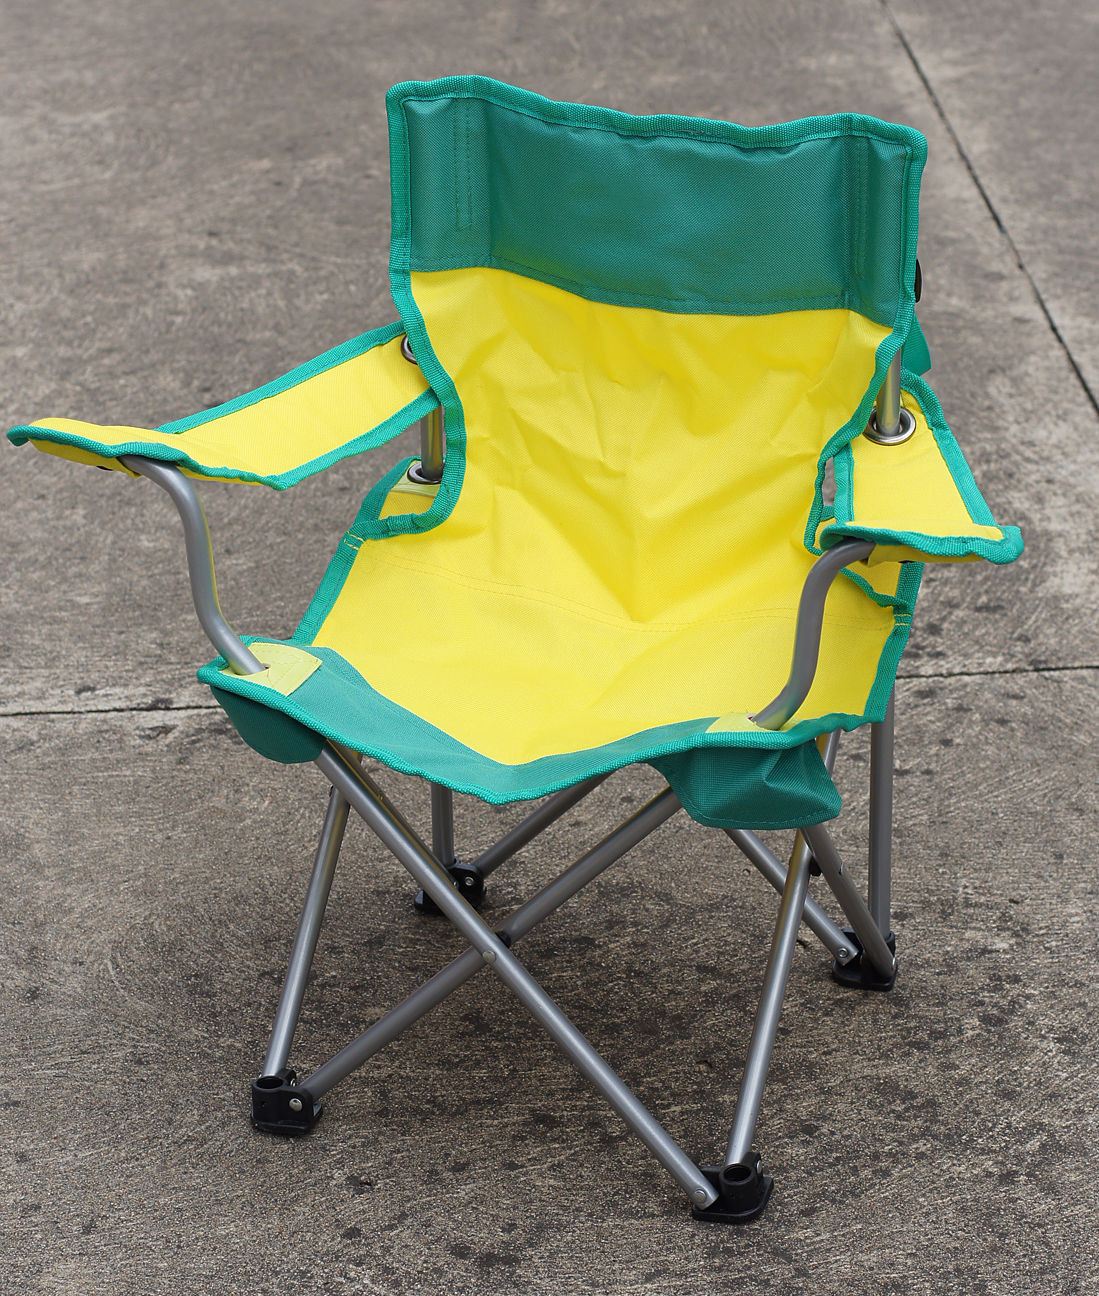 Kids Foldable Chair
 Kids Folding Chair With Arms Foldable Light Outdoor